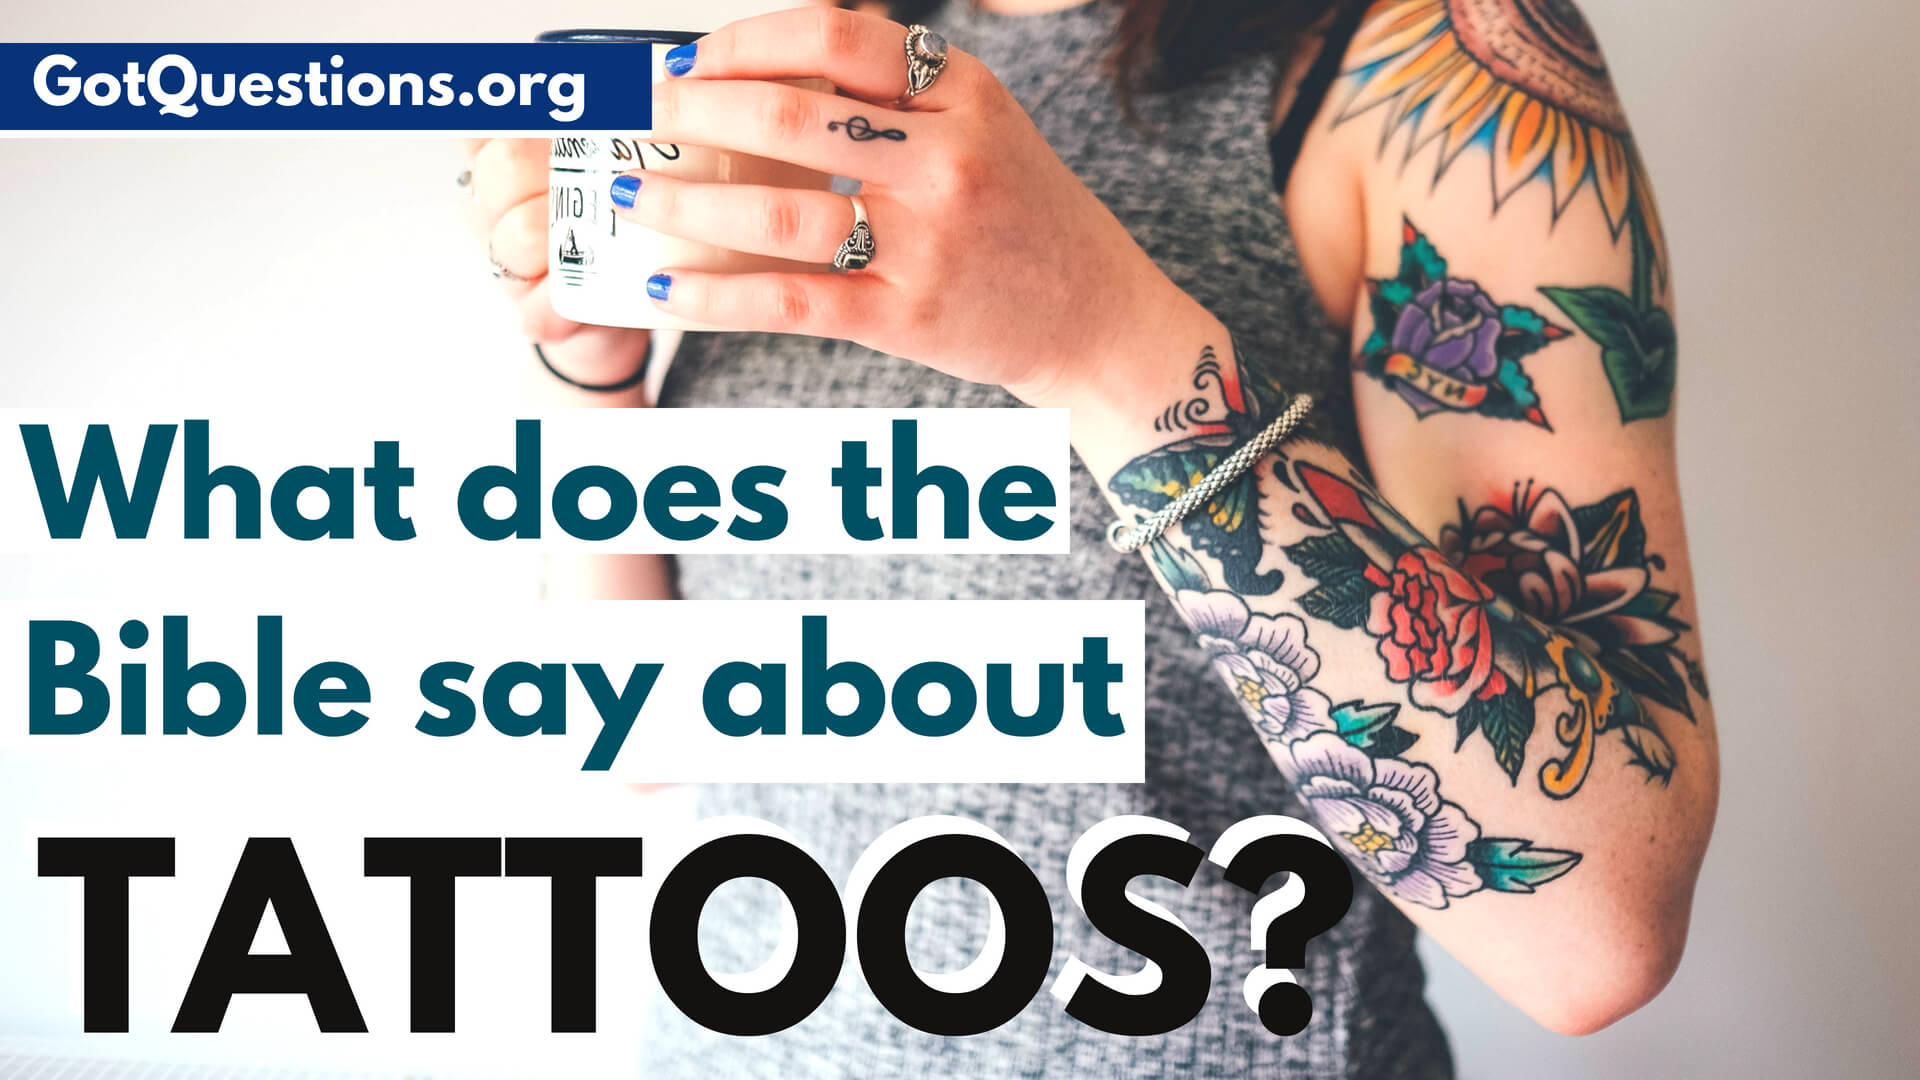 What does the Bible say about tattoos?